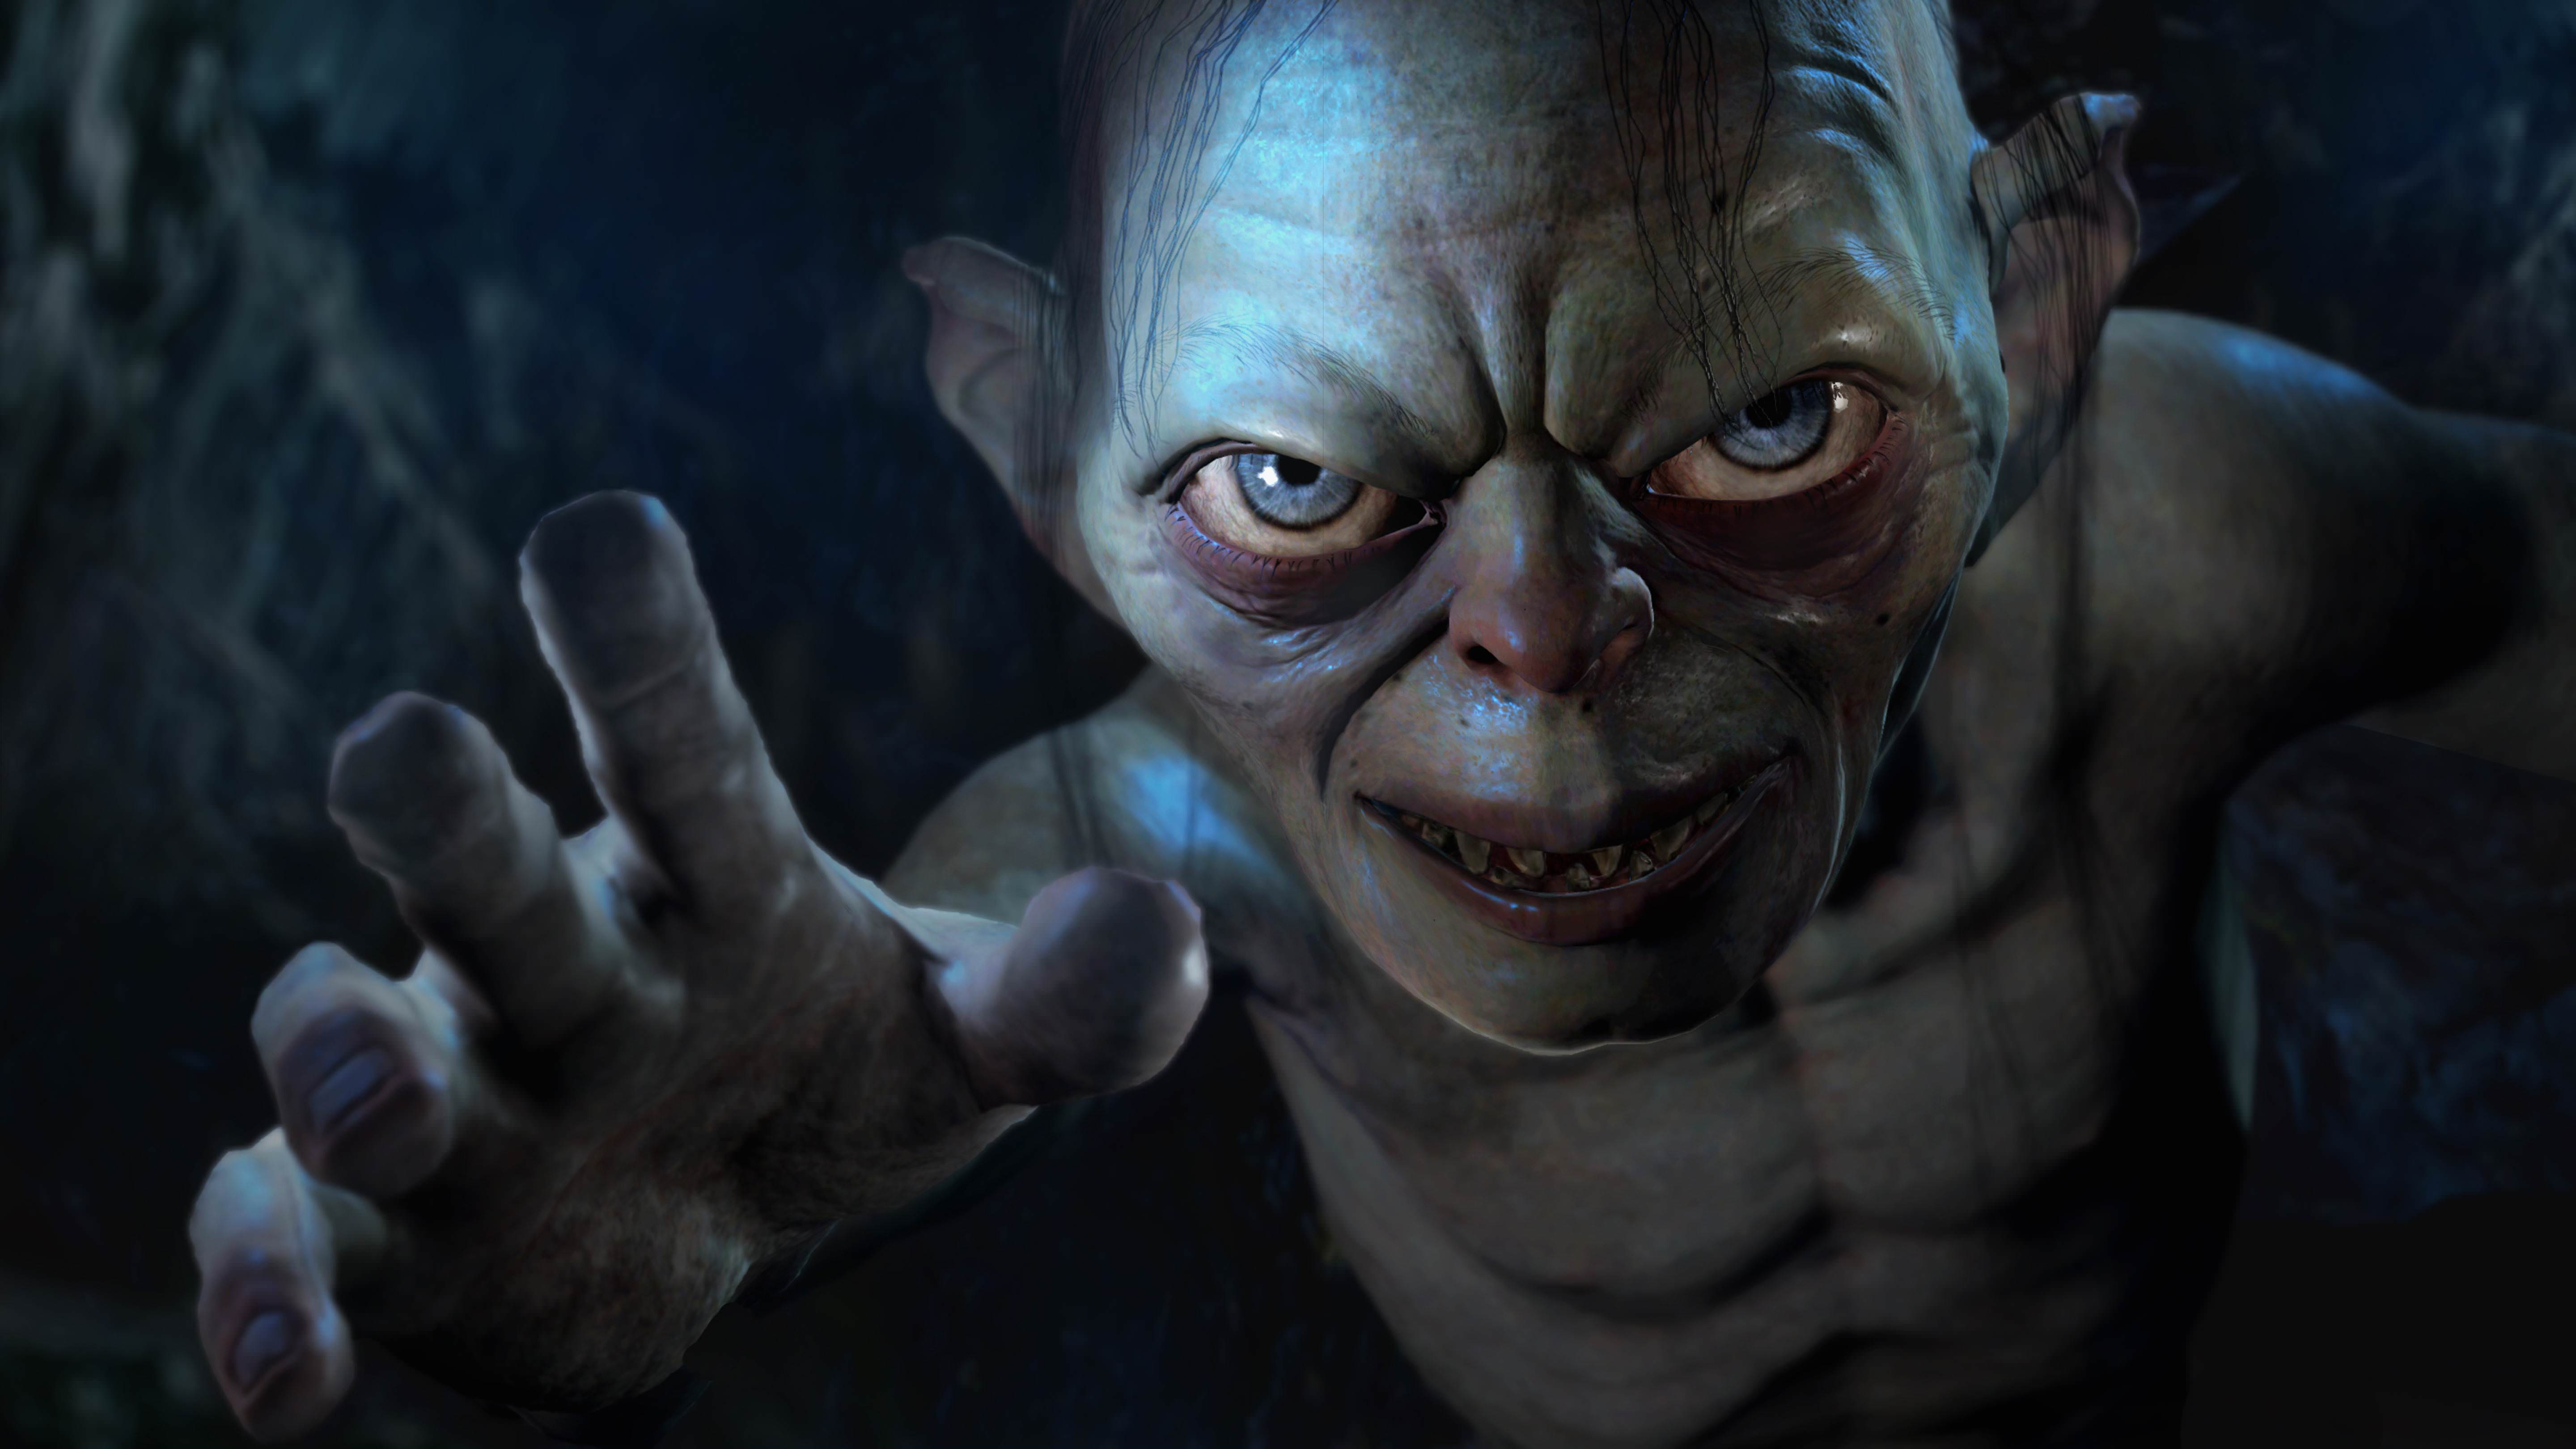 Lord Of The Rings Gollum Wallpaperx3240. Image Id 2941